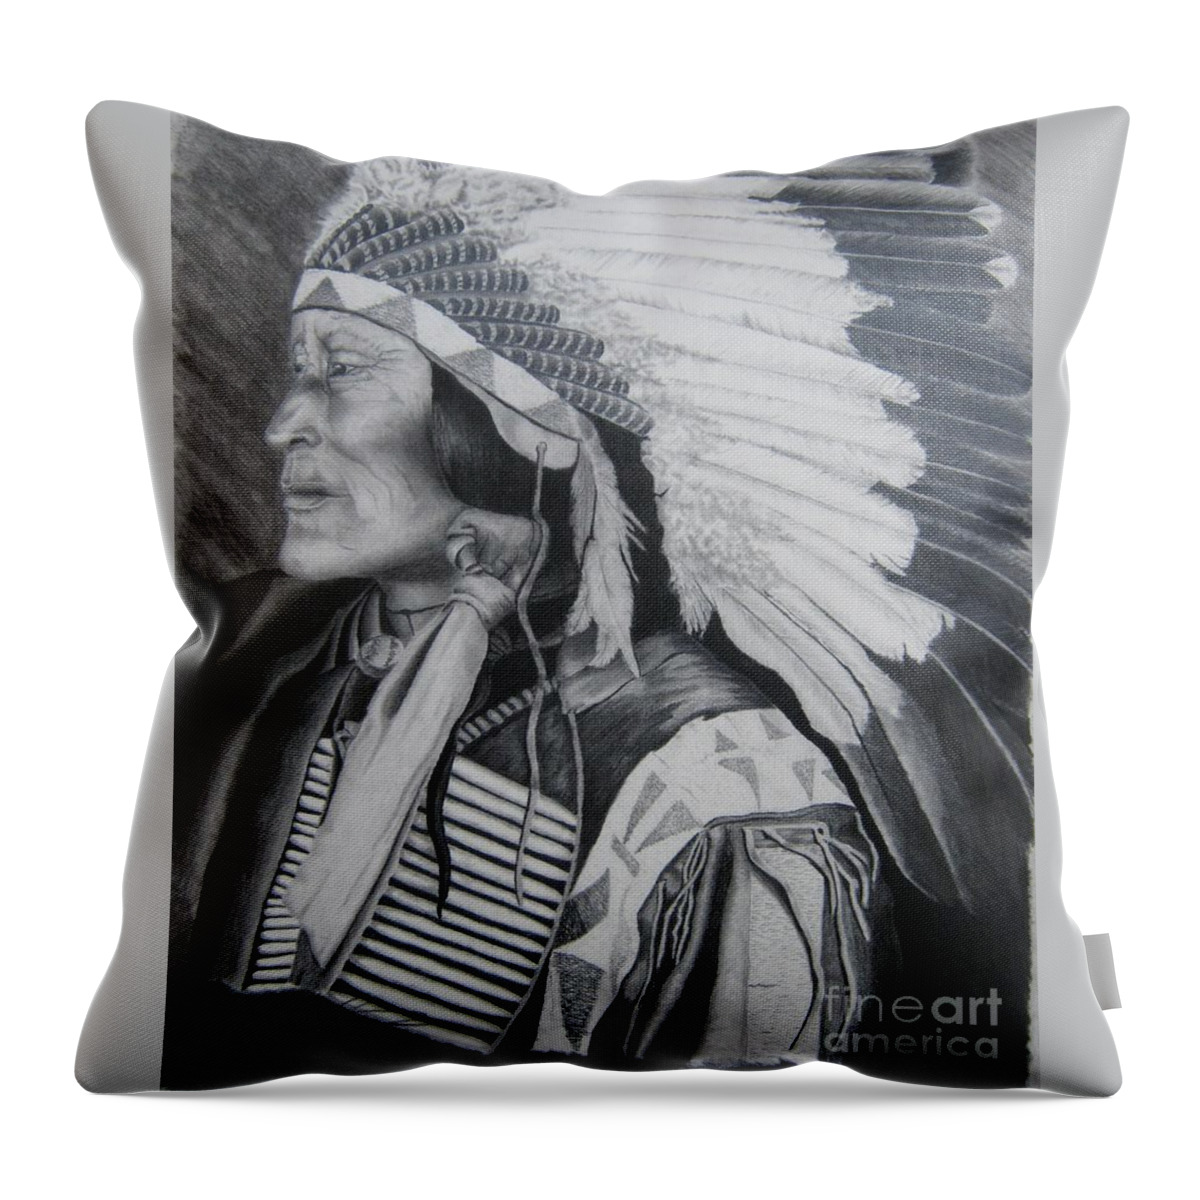 Native American Throw Pillow featuring the drawing Lokata chief by John Huntsman